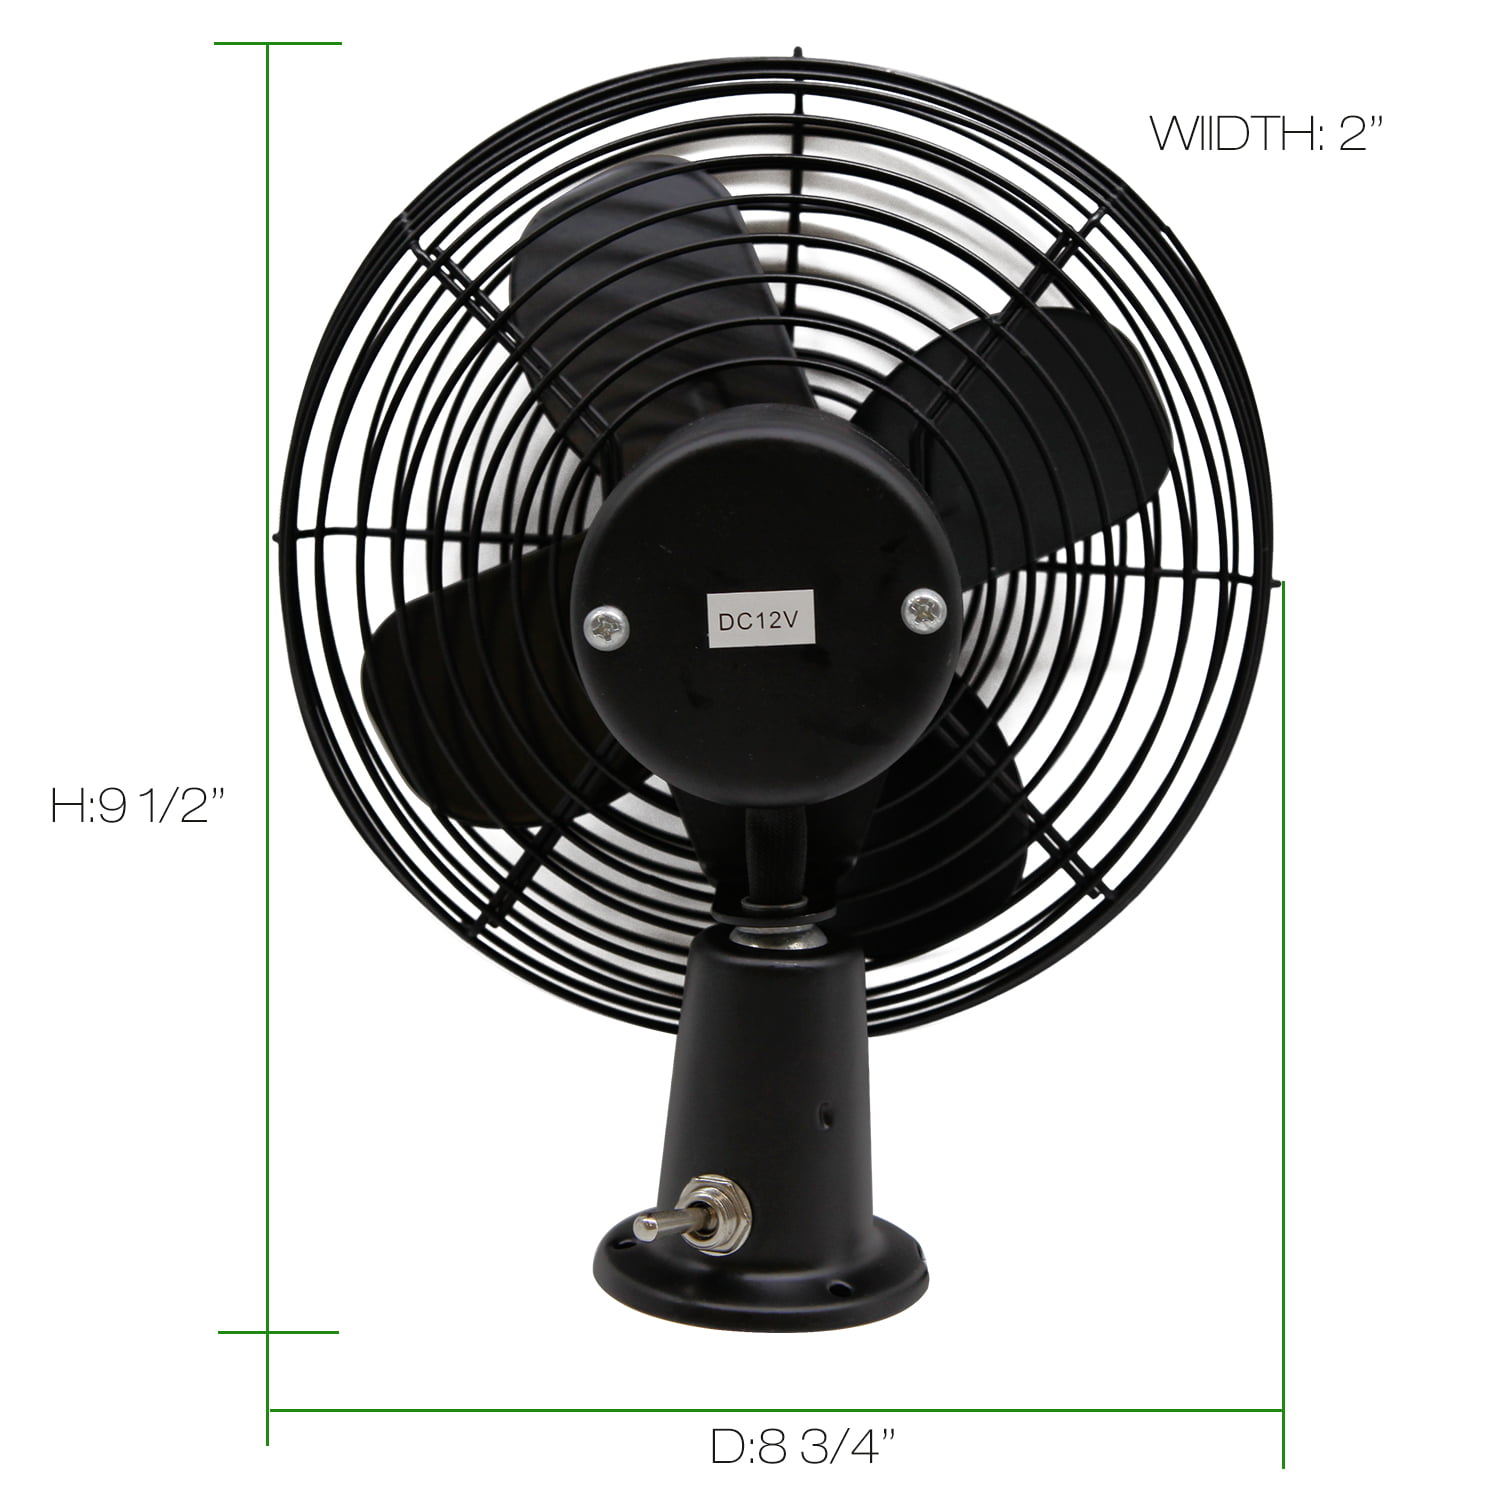 YOUGUOM 12V Car Fan, Auto Vehicle RV Powerful Macao